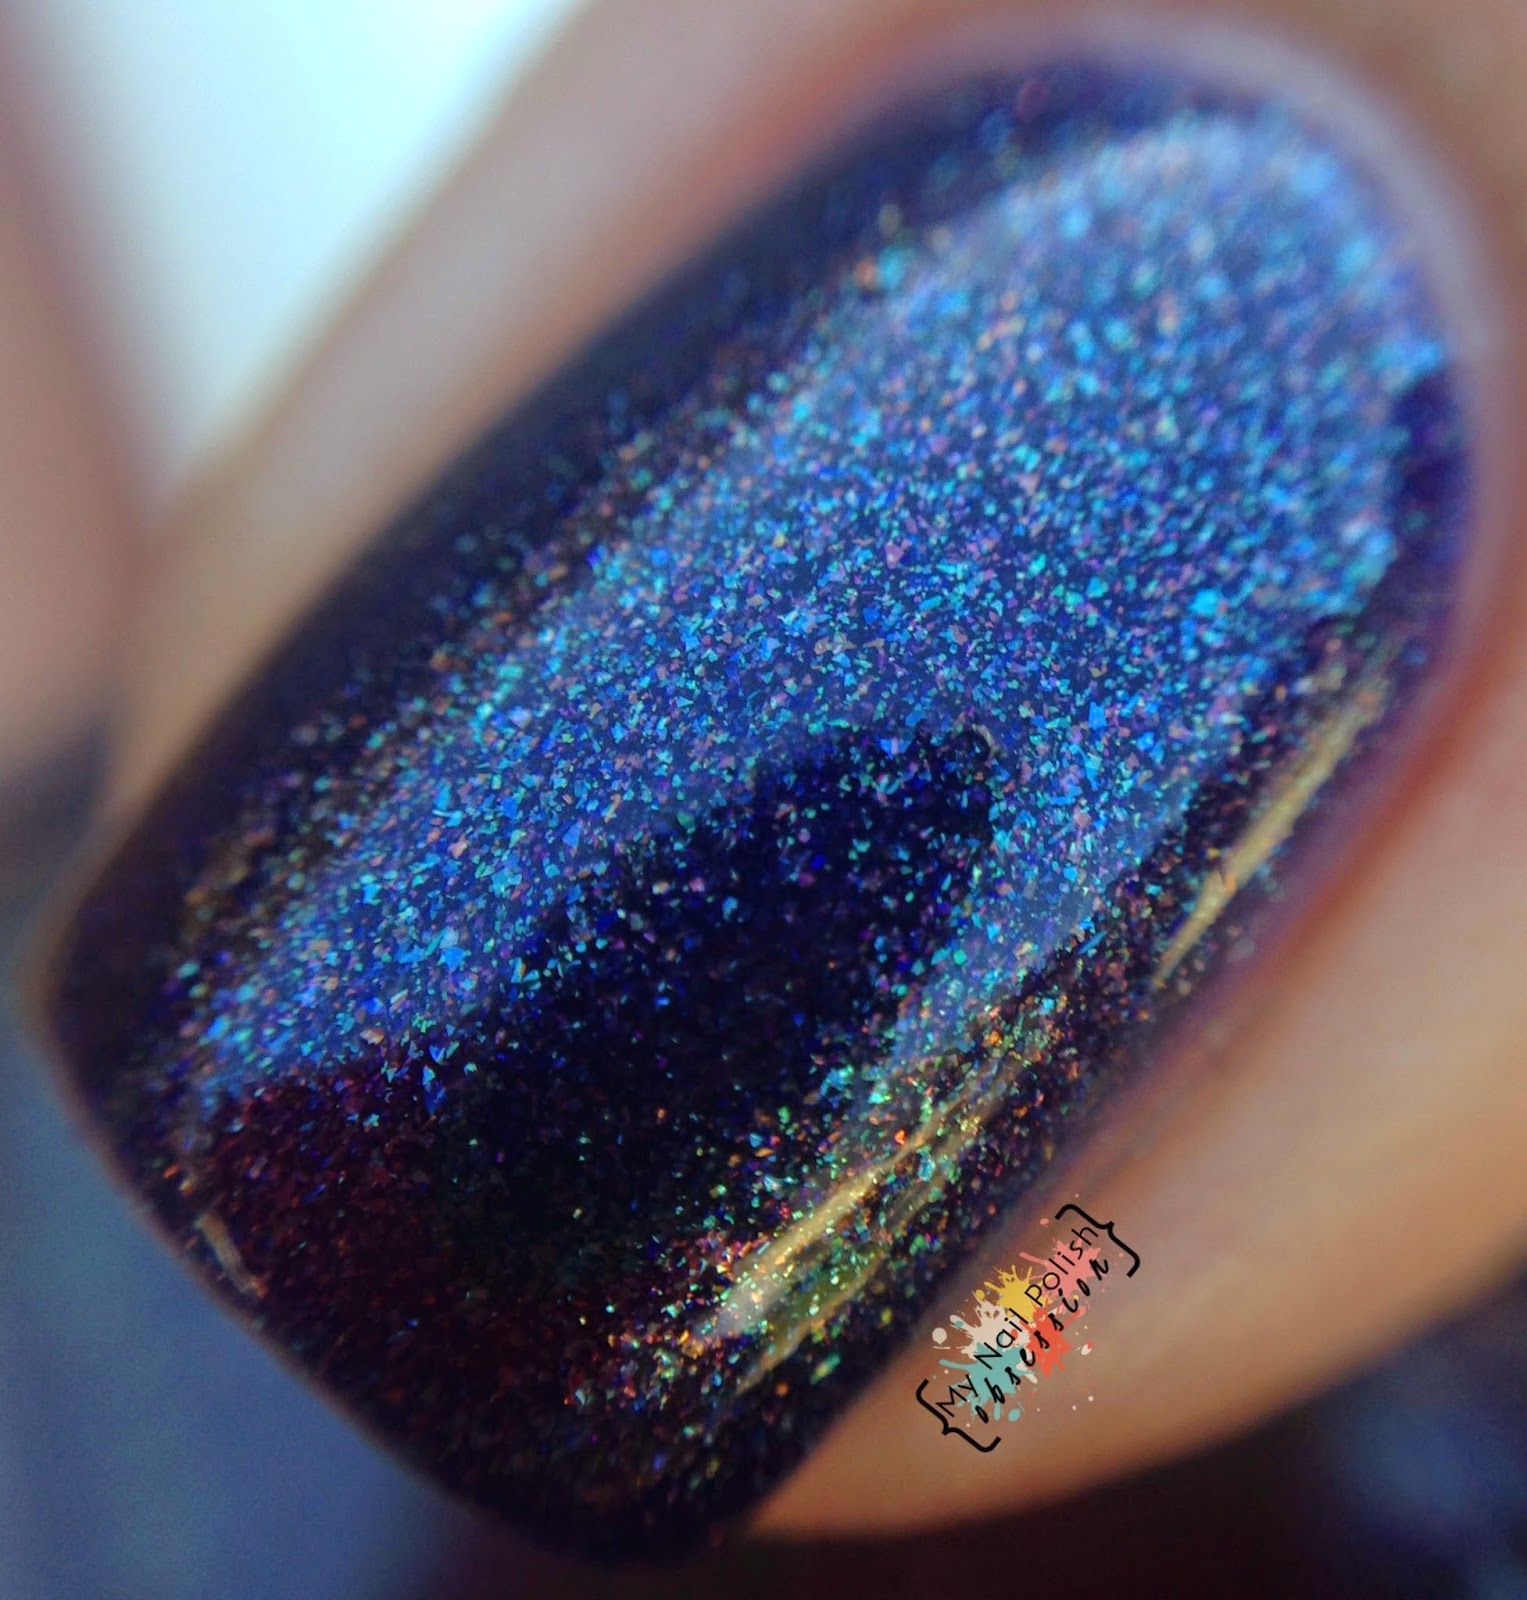 Blue Eyed Girl Lacquer I Wished For You, Too